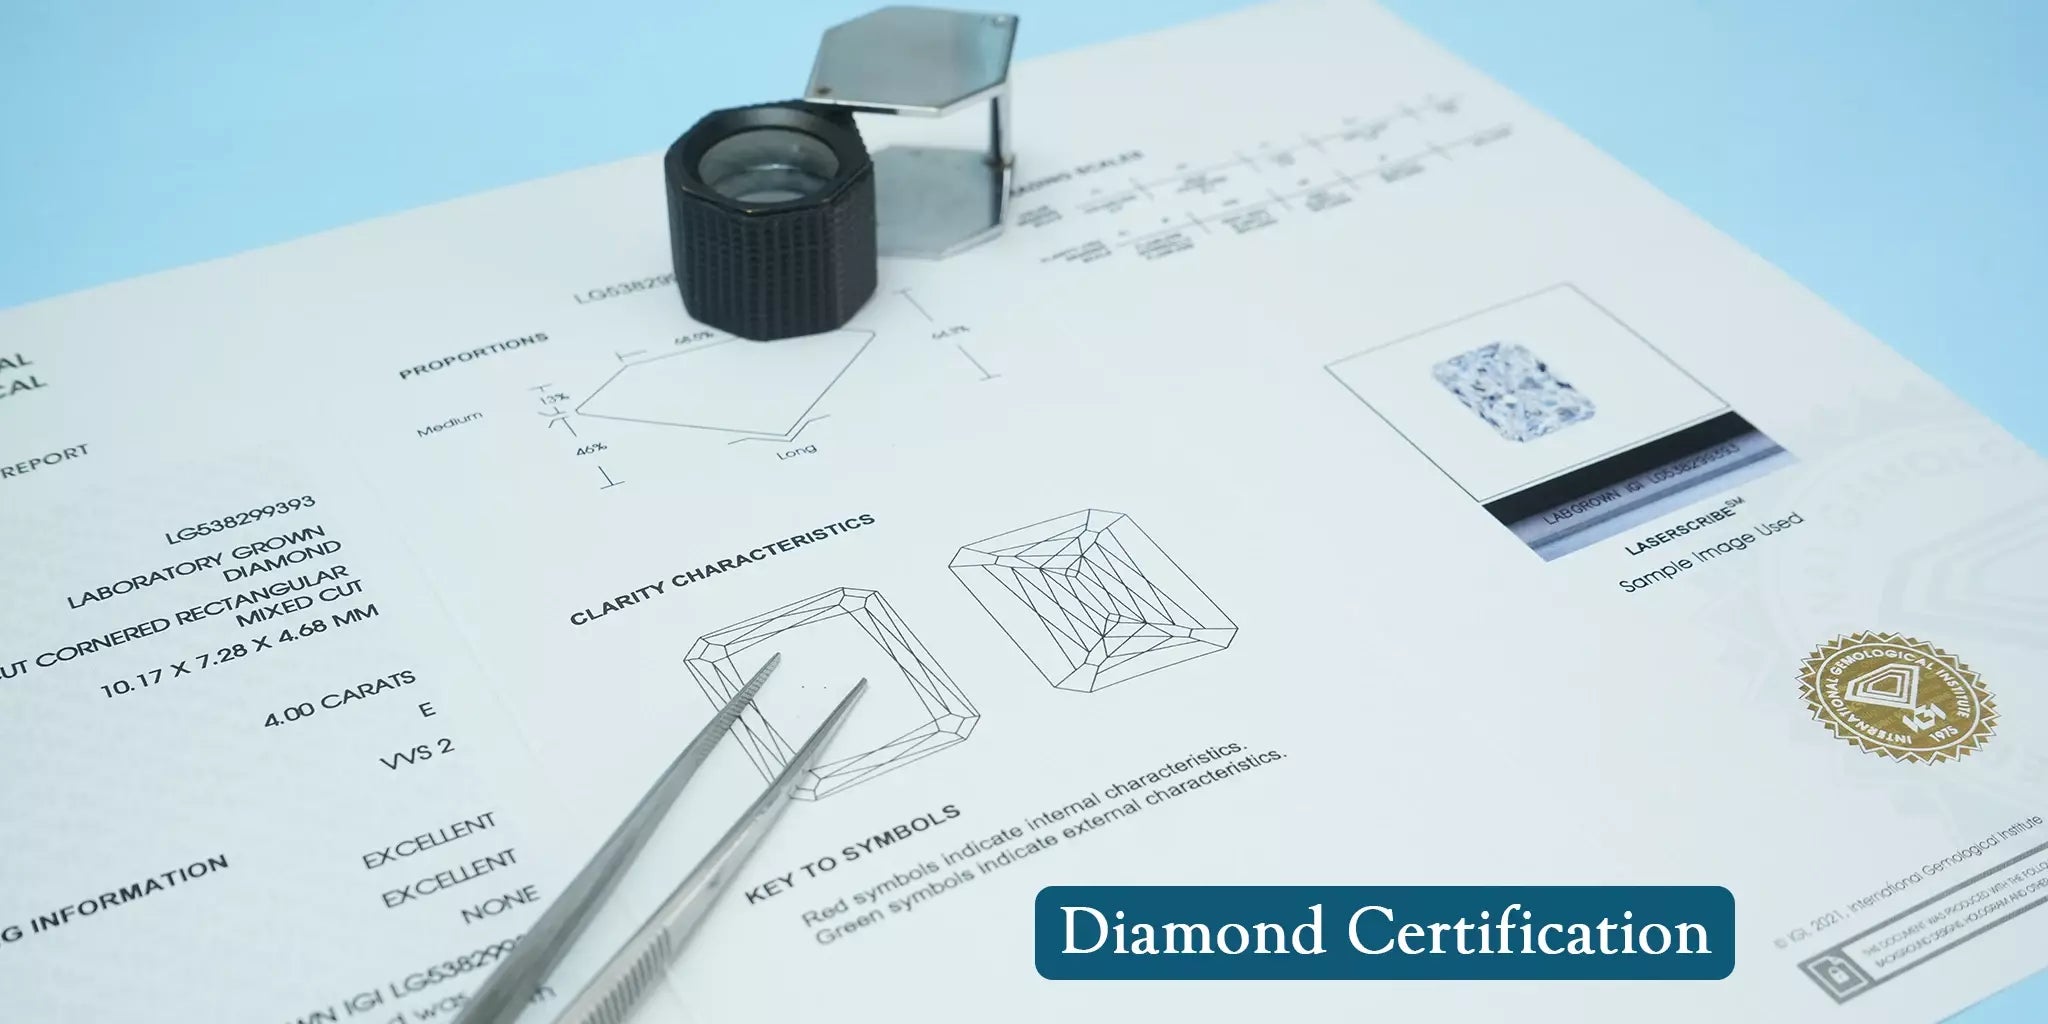 Diamond Certification from GIA and IGI